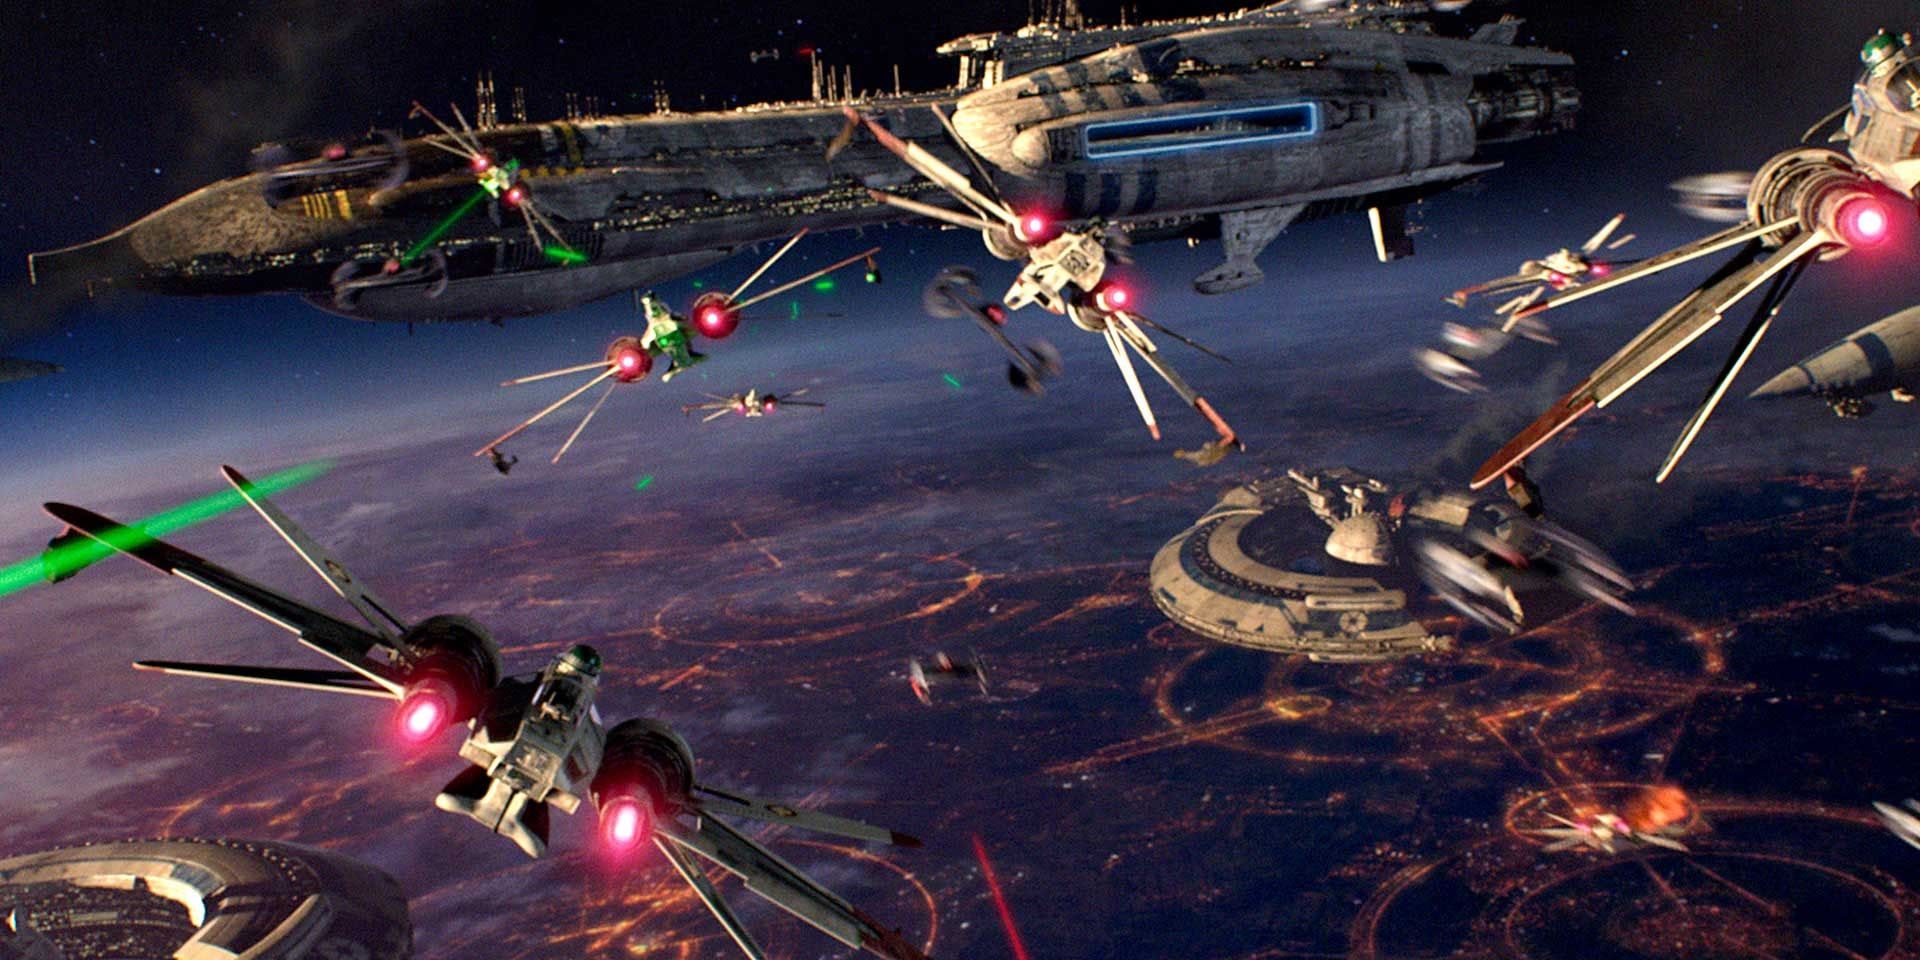 10 Greatest Battle Sequences In The Star Wars Saga